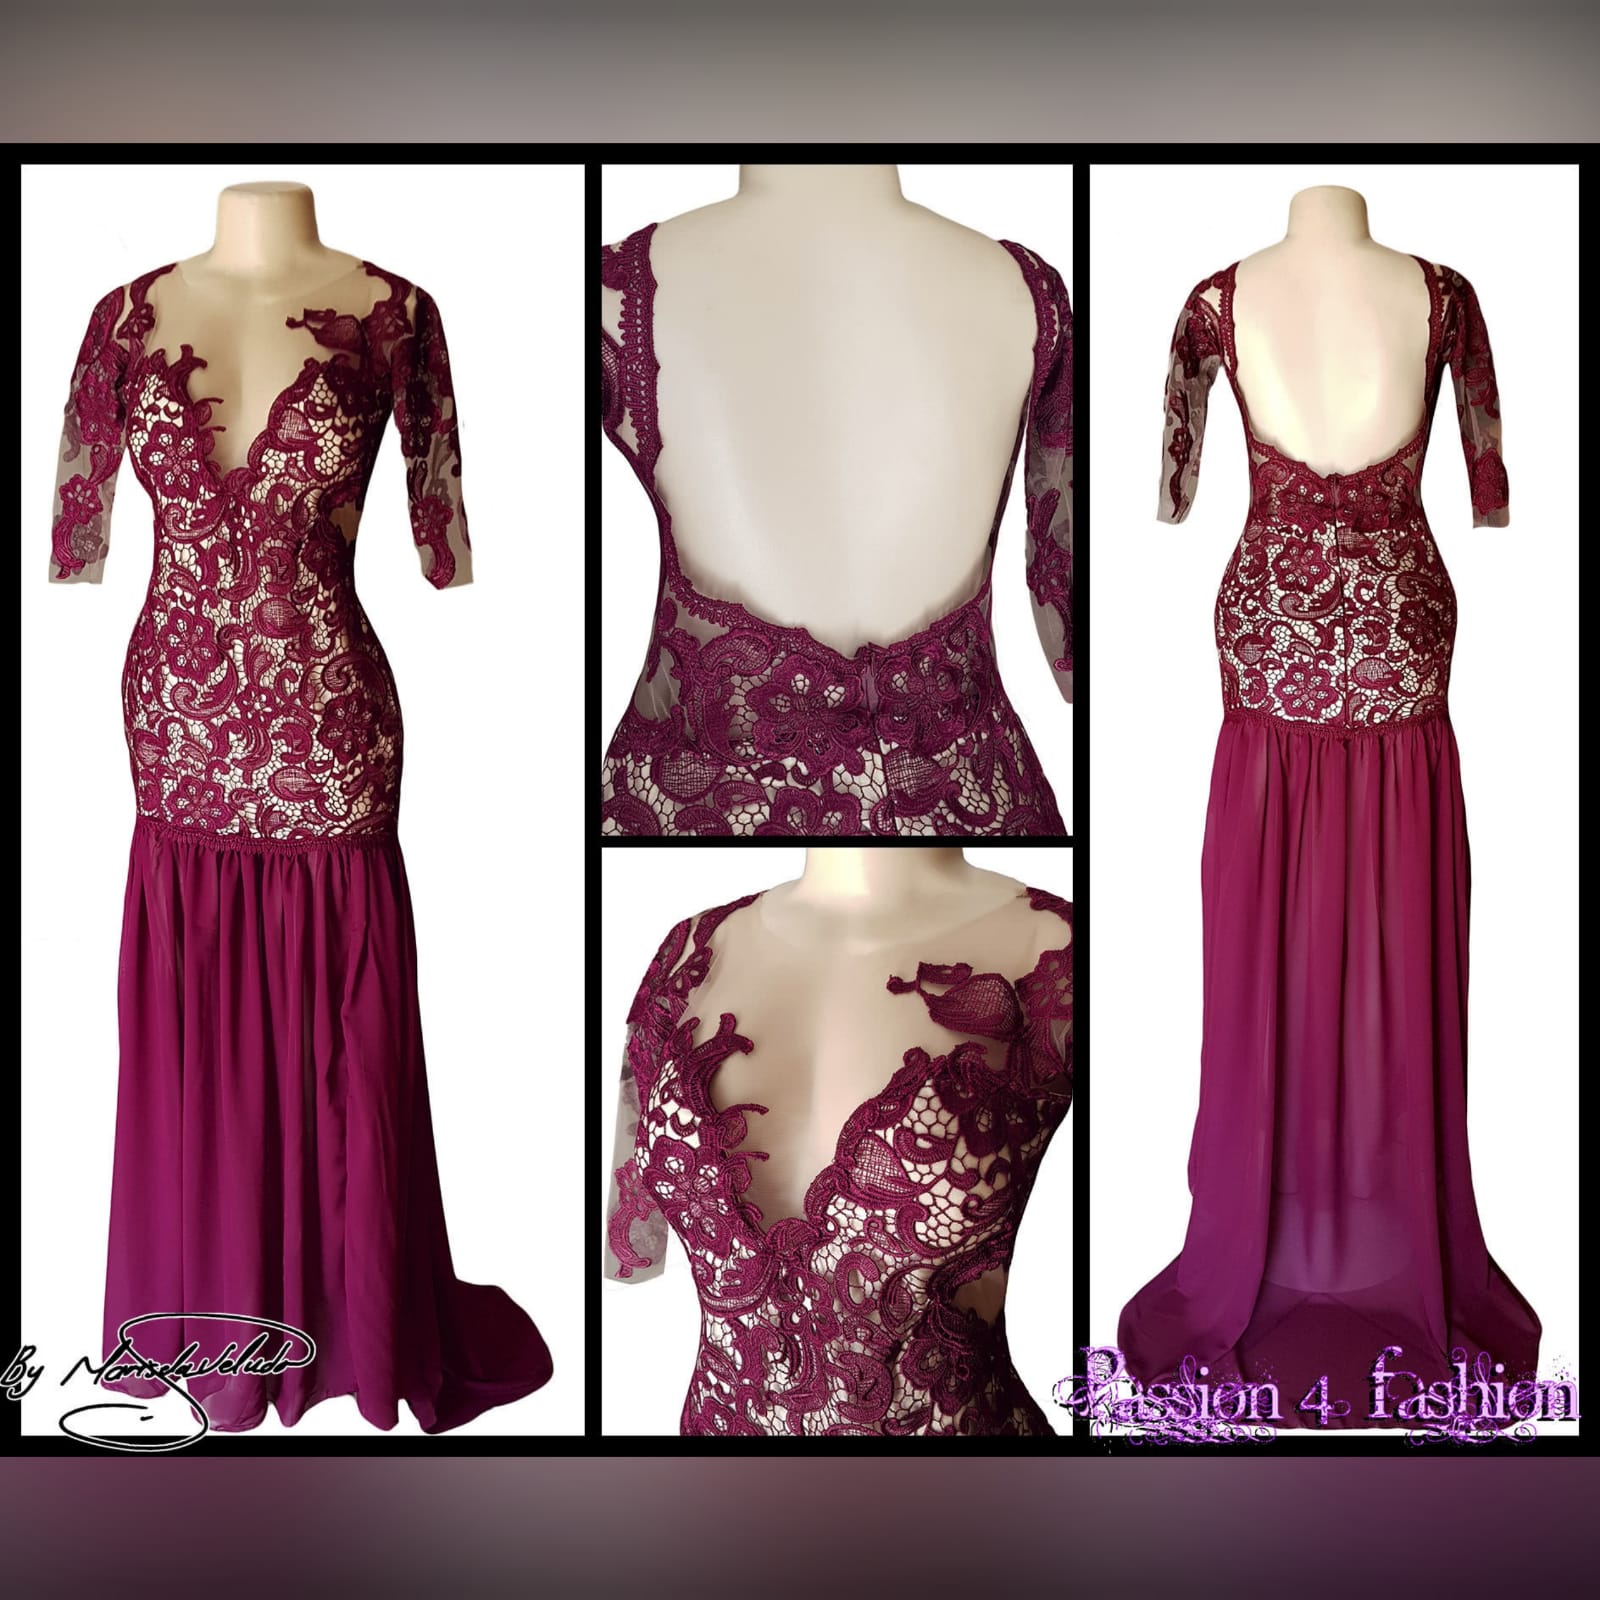 Tight to the hip burgundy & nude lace prom dress 2 burgundy & nude lace prom dress, fitted to the hip, with sheer flowy legs, with a slit and a train. Rounded illusion open back and plunging neckline with 3/4 sleeves.